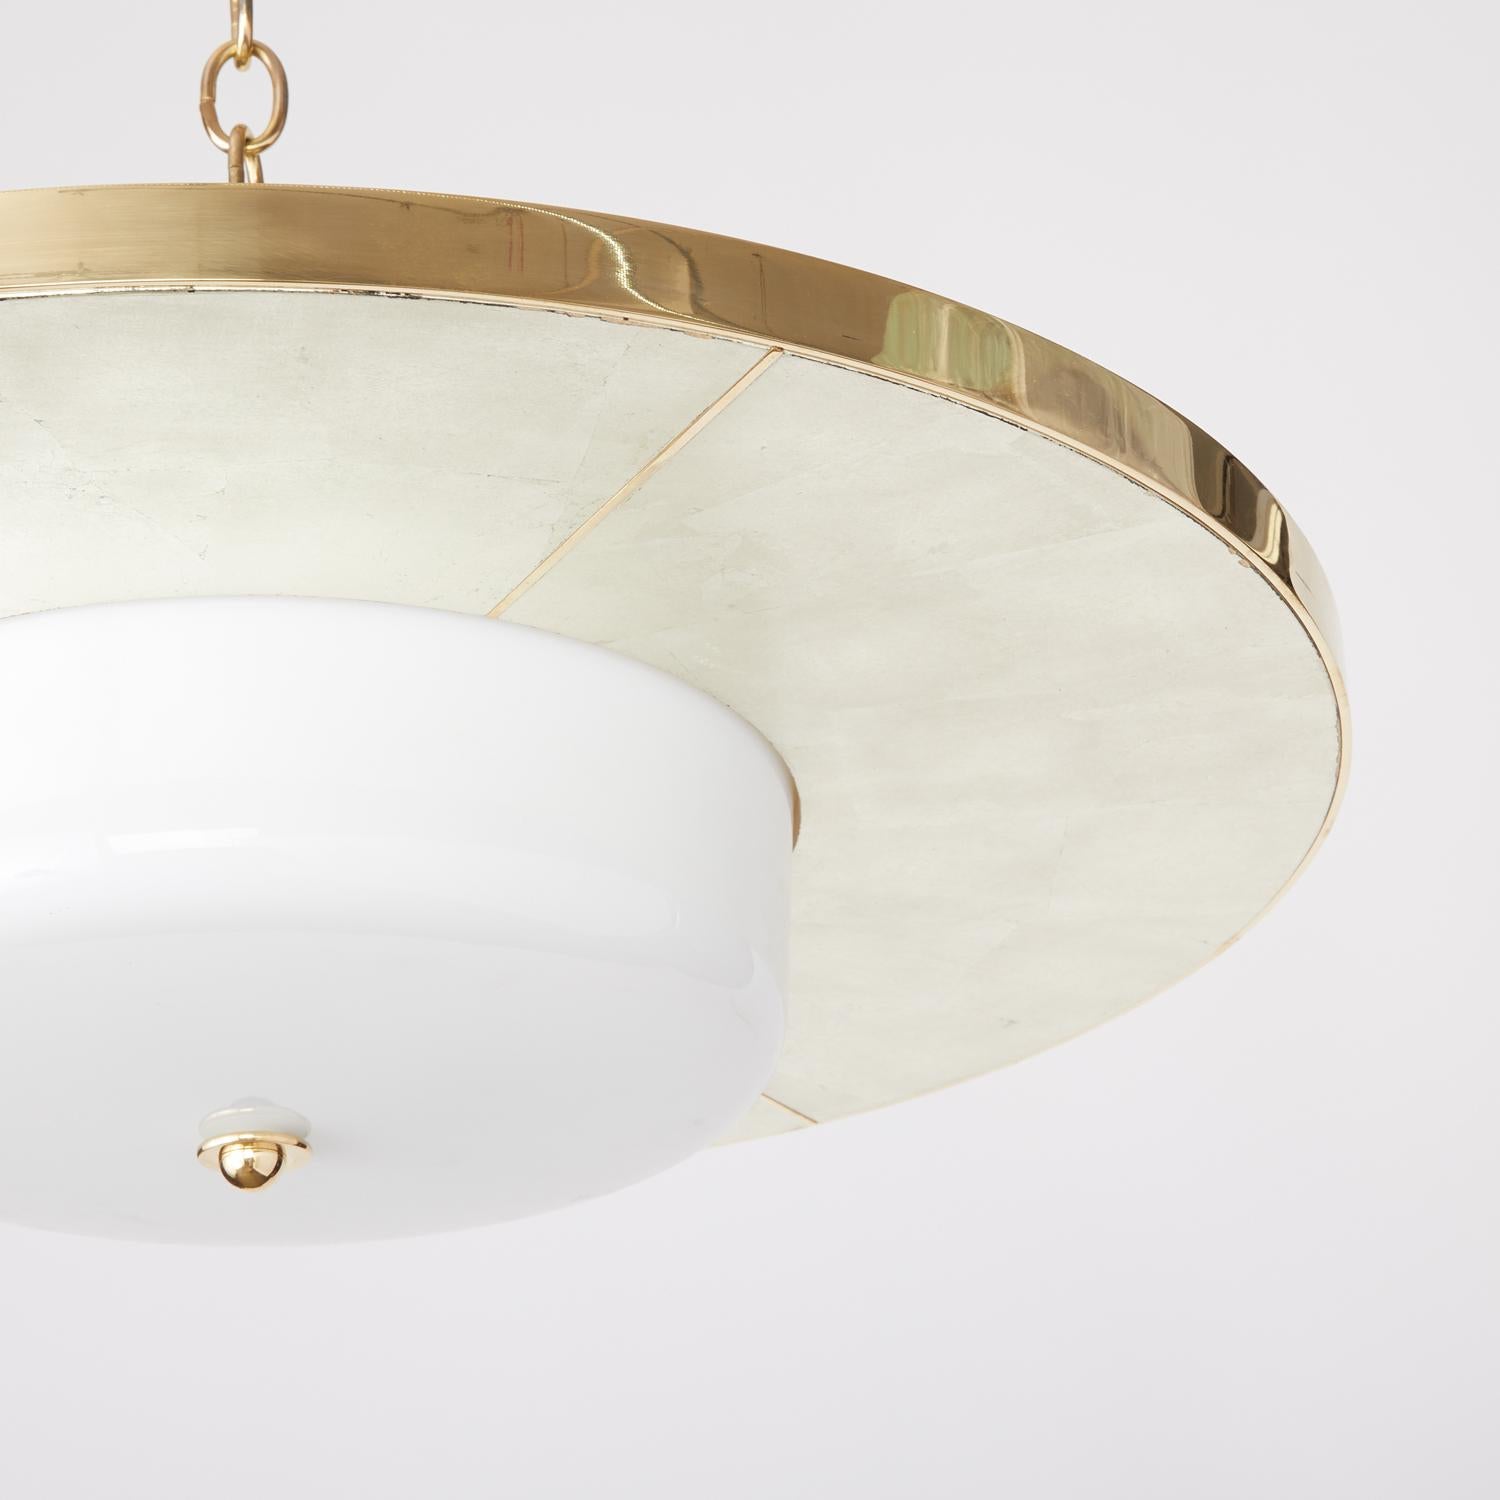 A custom, Art Deco style flush mounted light fixture inspired by the Swedish Grace Period. This vibrant fixture features a silver leaf frame with polished brass details and a 18